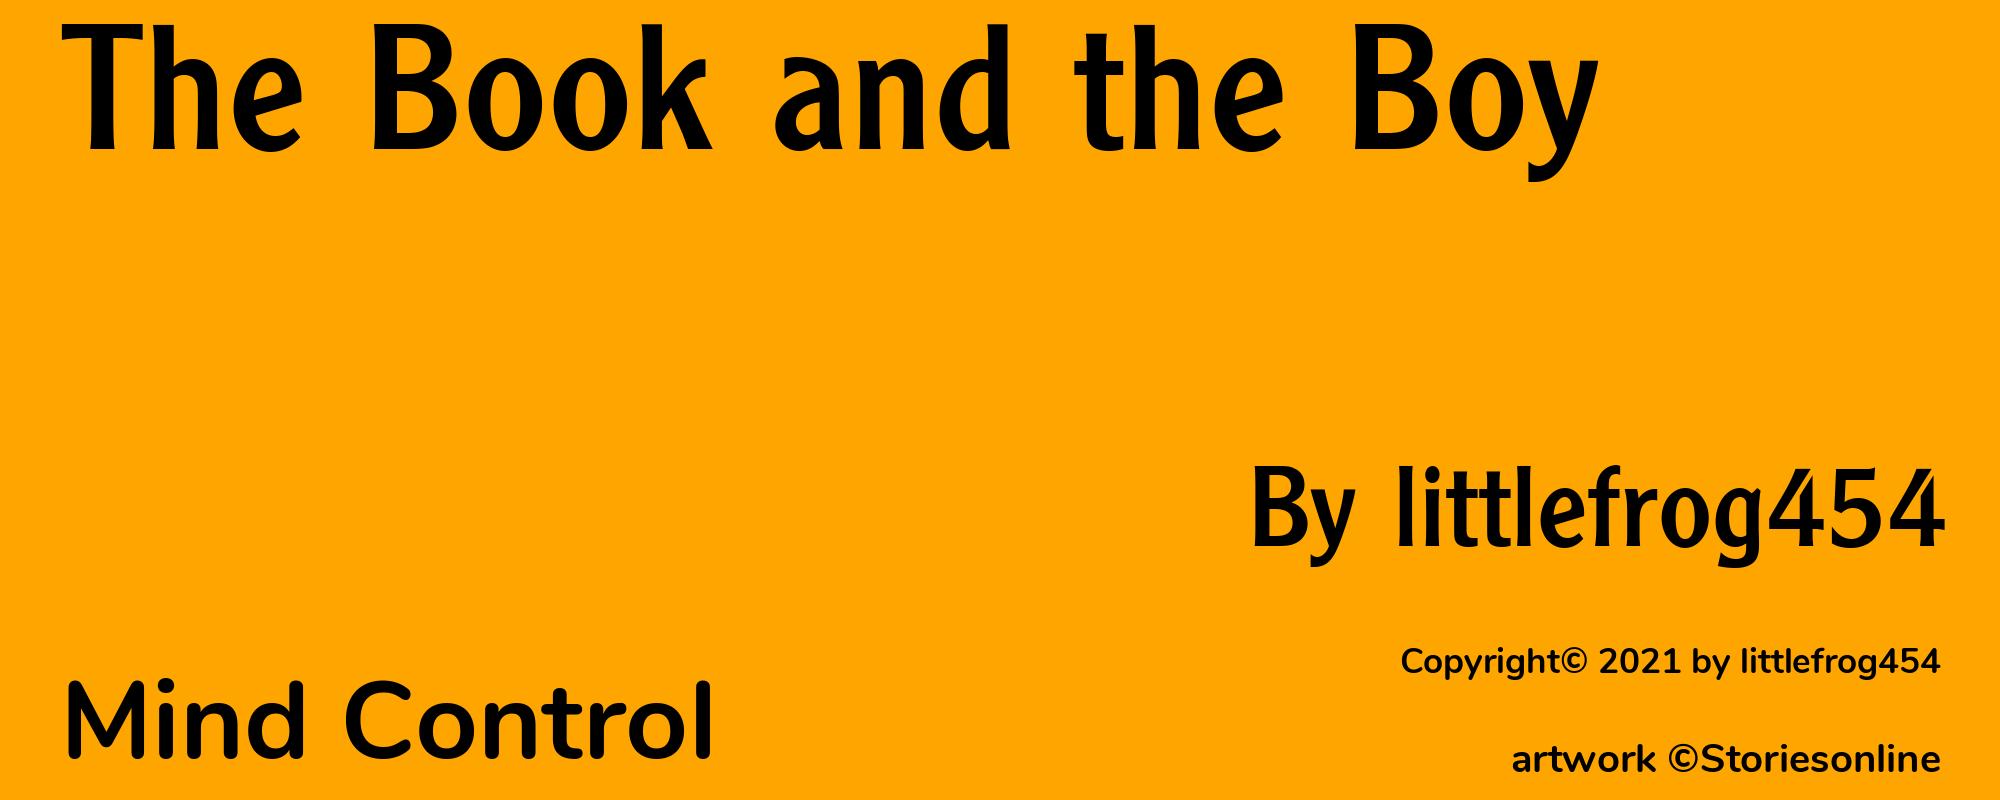 The Book and the Boy - Cover